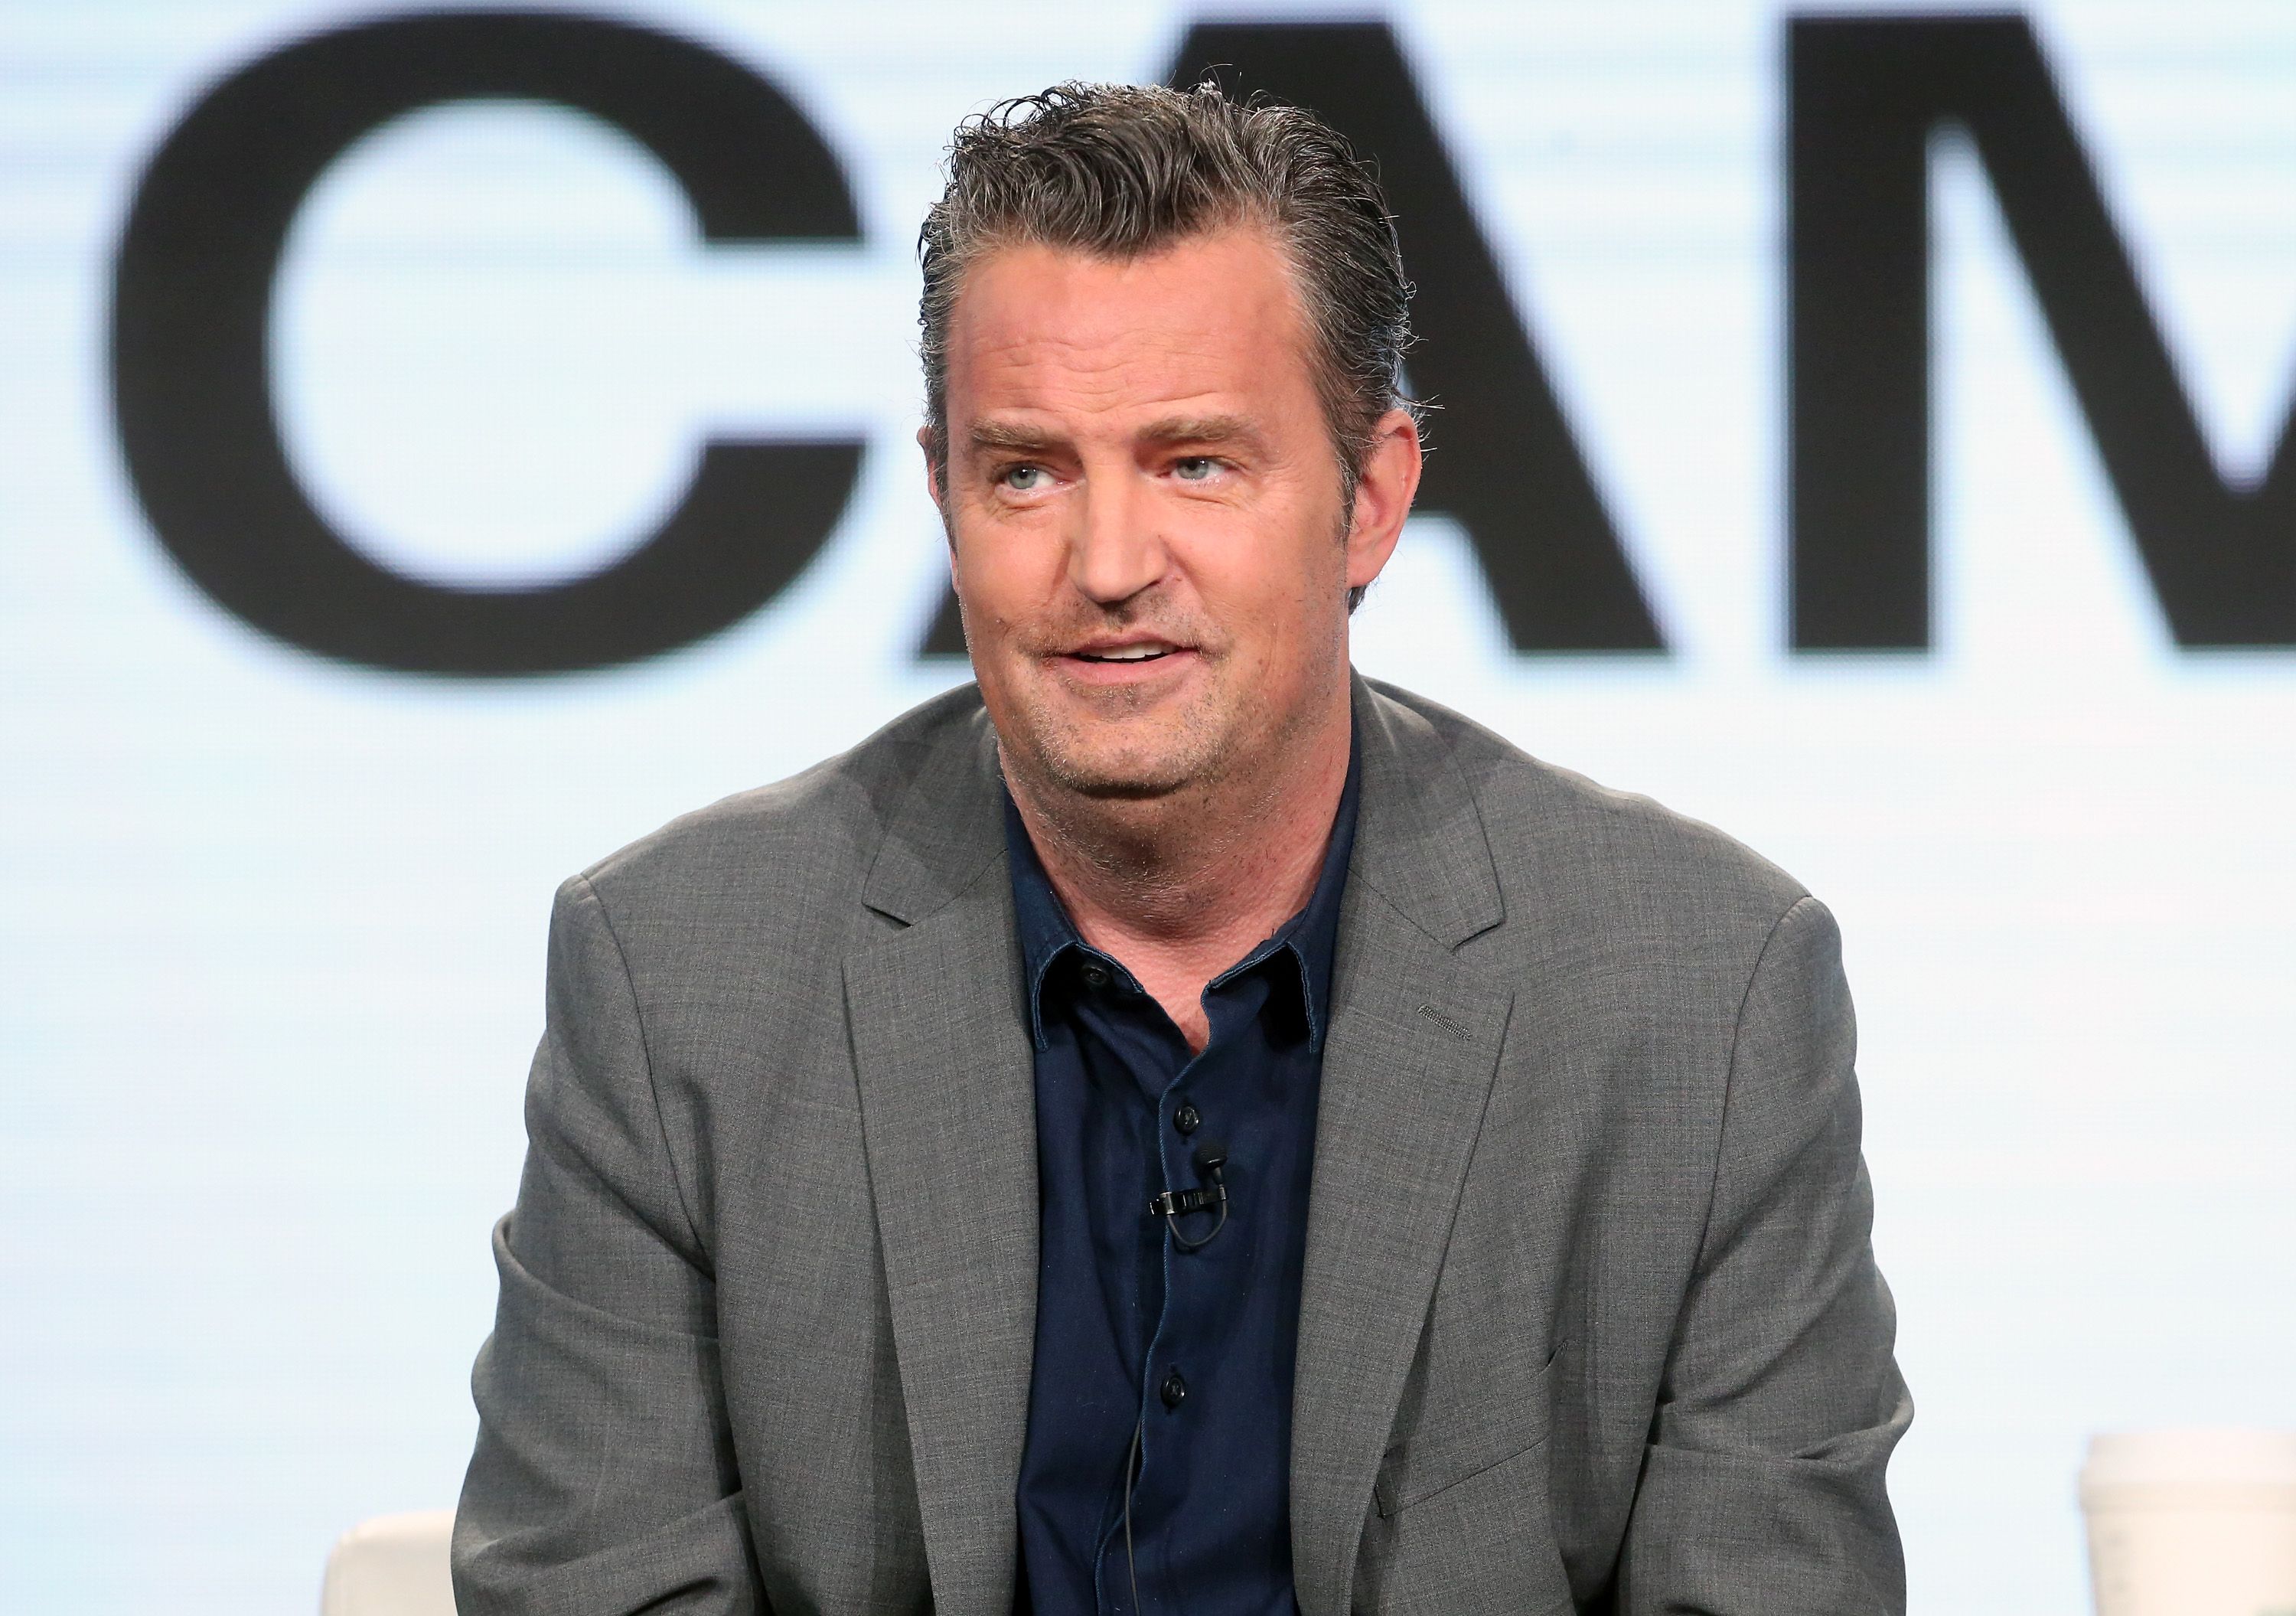 Matthew Perry during the REELZChannel portion of the 2017 Winter Television Critics Association Press Tour at the Langham Hotel on January 13, 2017, in Pasadena, California. | Source: Getty Images